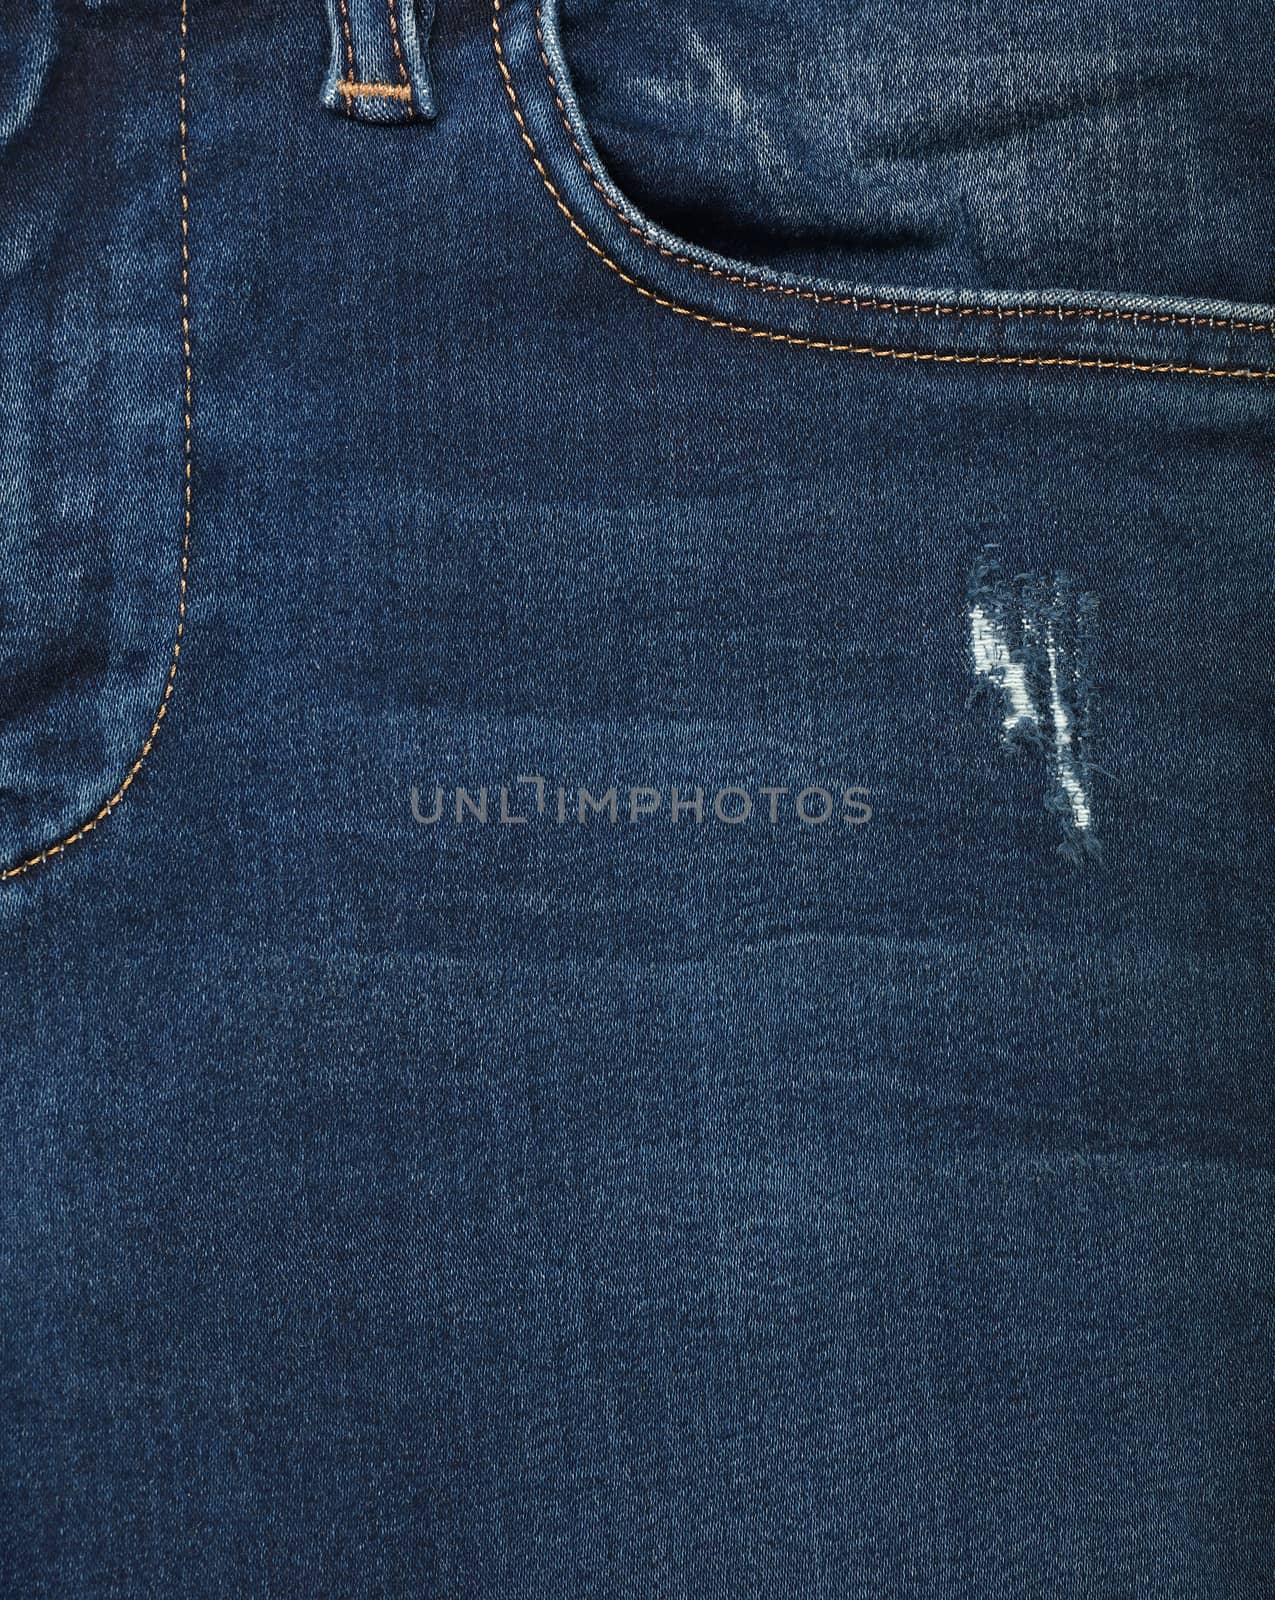 Blue washed jeans denim with pocket by BreakingTheWalls